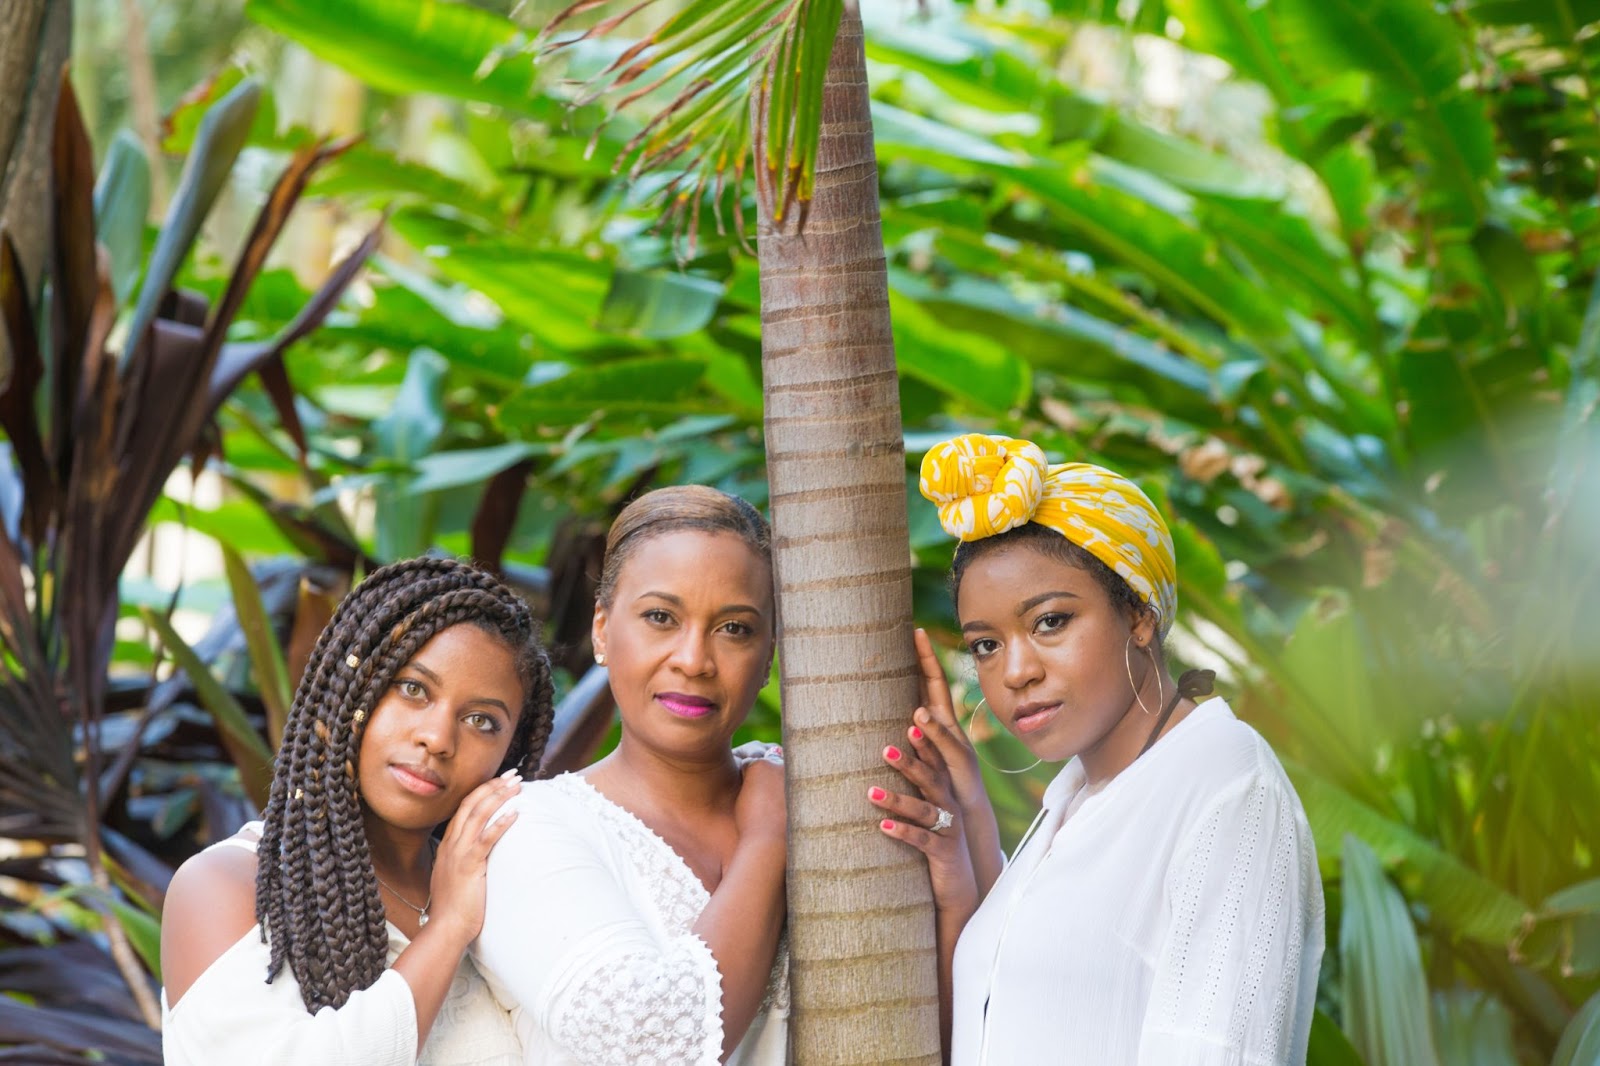 Three Black women pose around a palm tree in a tropical rainforest.